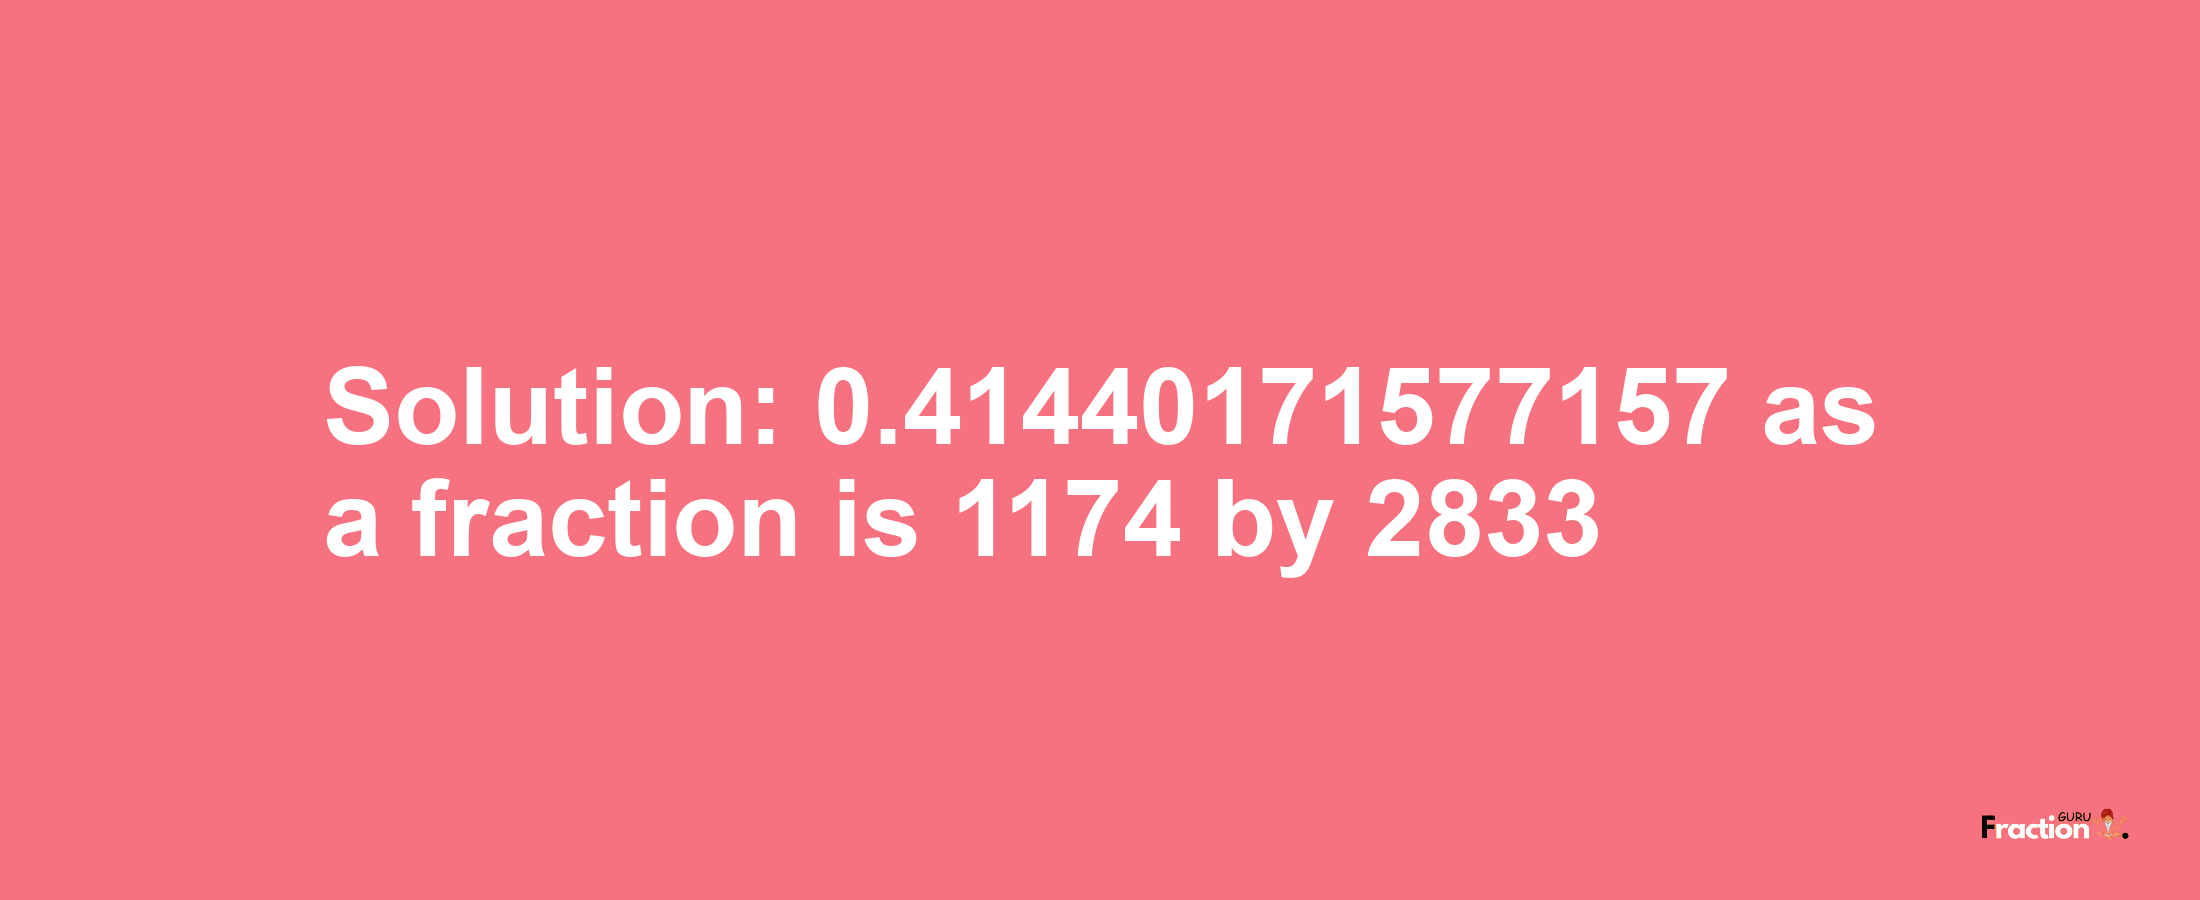 Solution:0.41440171577157 as a fraction is 1174/2833